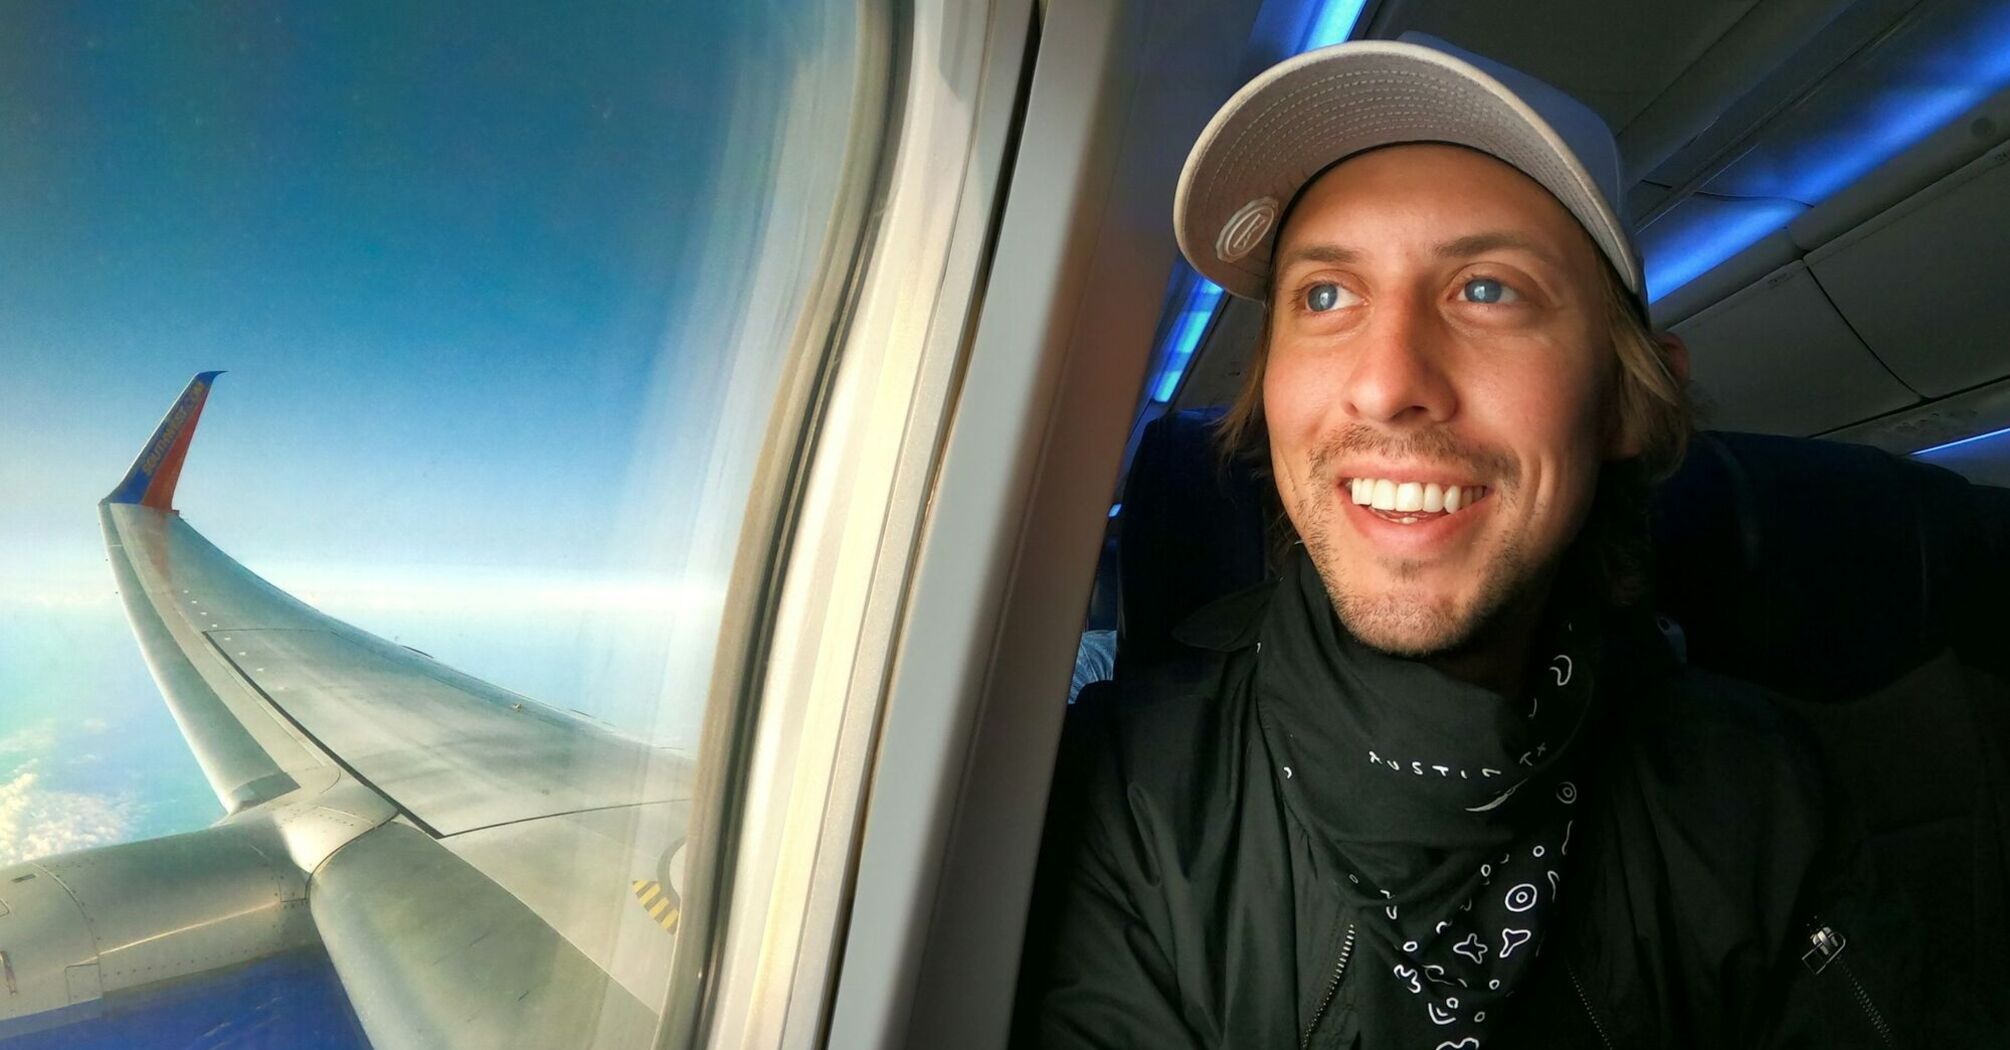 Smiling man enjoying a flight with a view of airplane wing through window